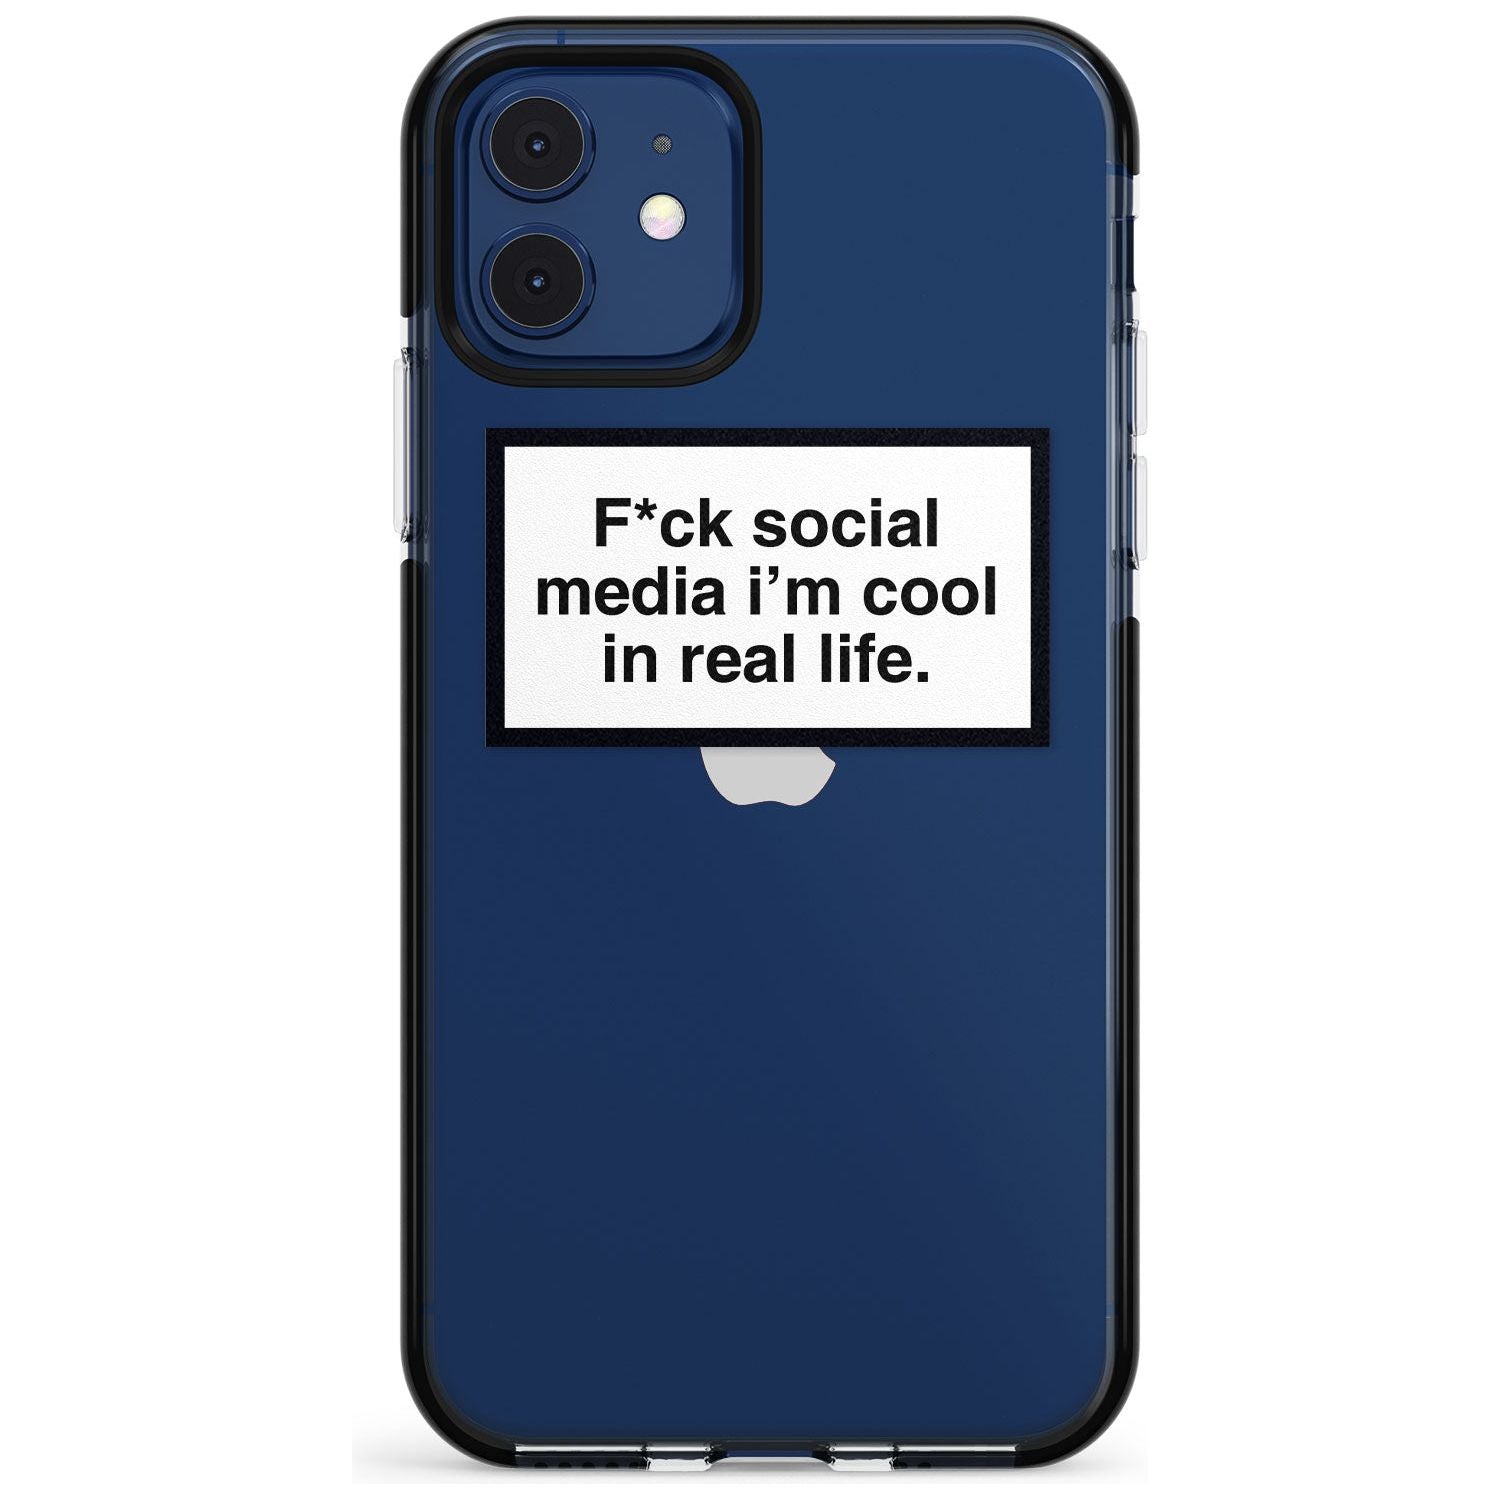 F*ck social media I'm cool in real life Pink Fade Impact Phone Case for iPhone 11 Pro Max